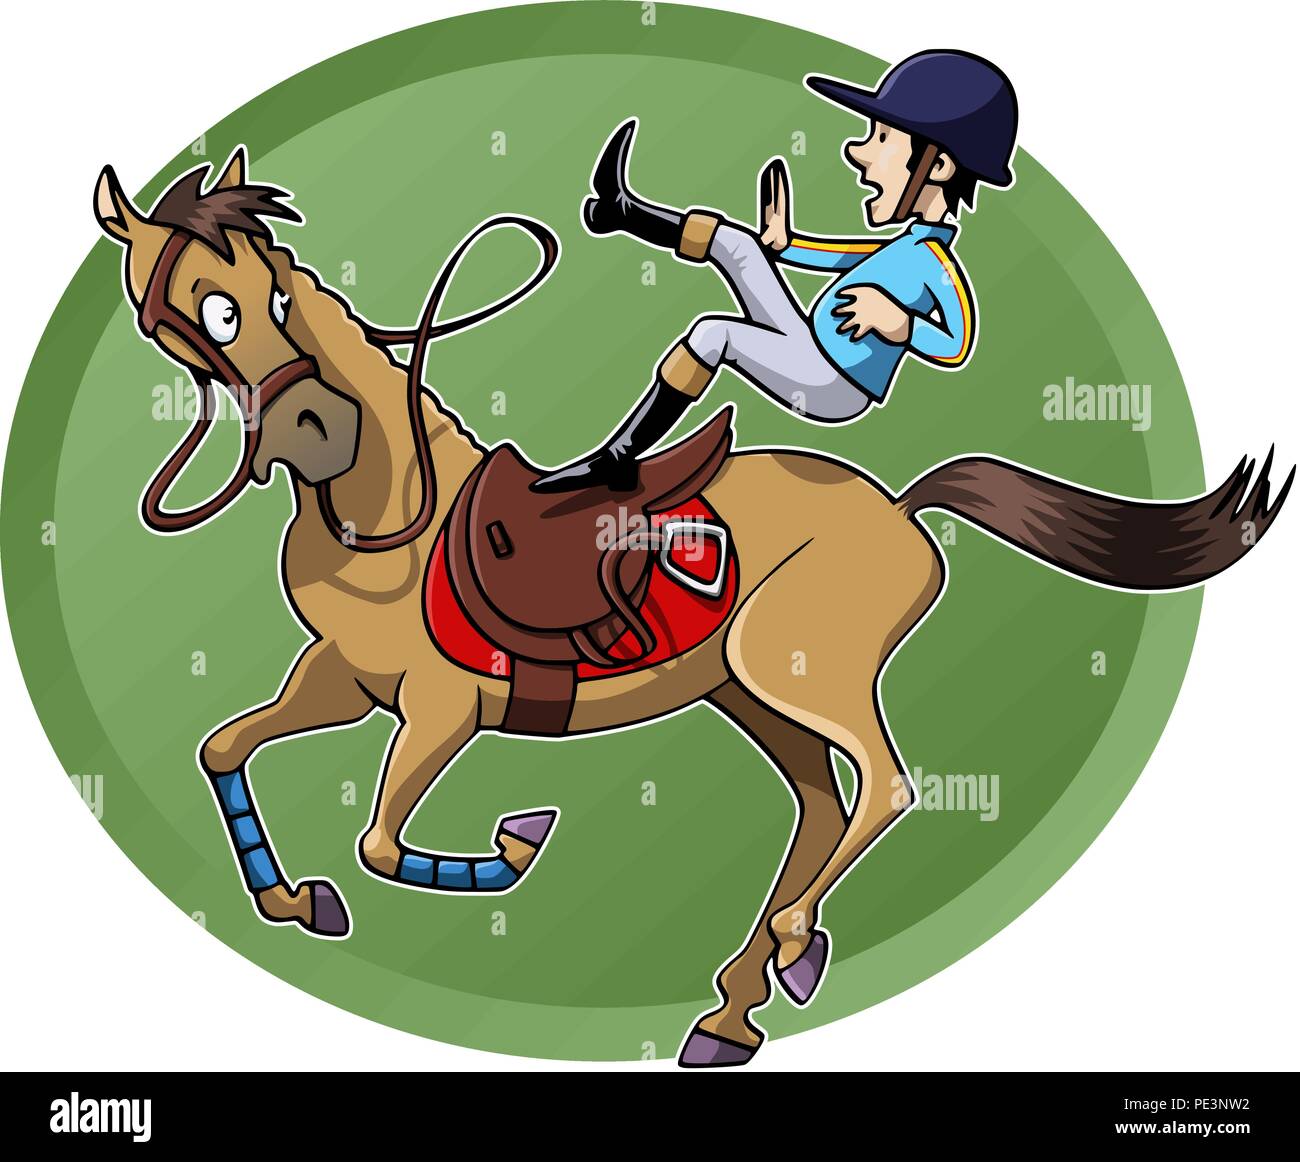 Funny cartoon-style illustration: a rider is unsaddled from his galloping horse. Green oval shape on the background Stock Vector